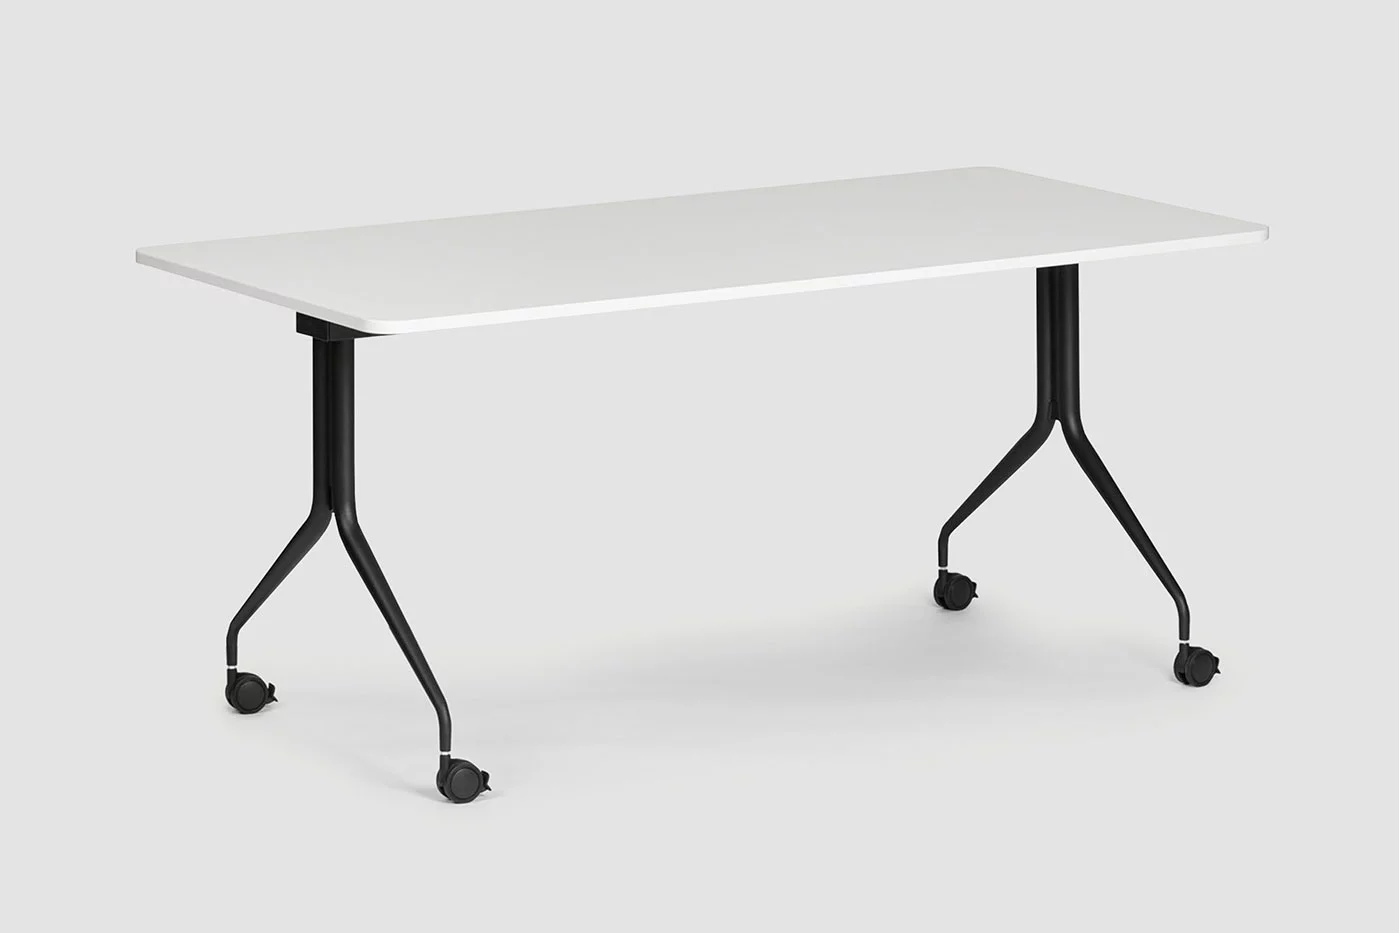 flex-schwenktisch-slim, Foldable or collapsible Seating height Meeting table, Bene Office furniture, Image 1